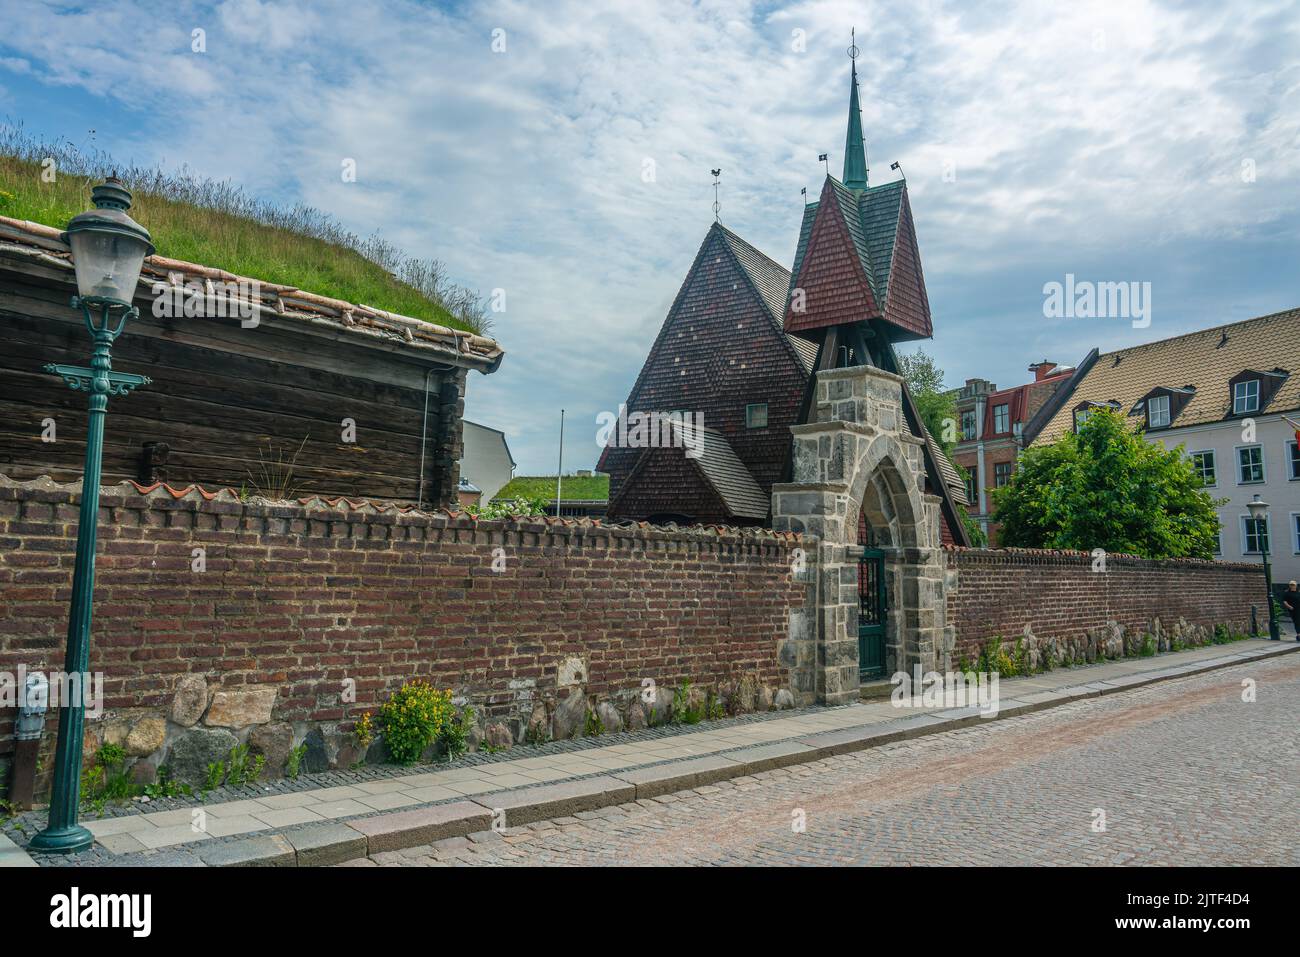 Lund, Sweden - June 9, 2022: Gate to old medieval settlings in a university city well preserved Stock Photo